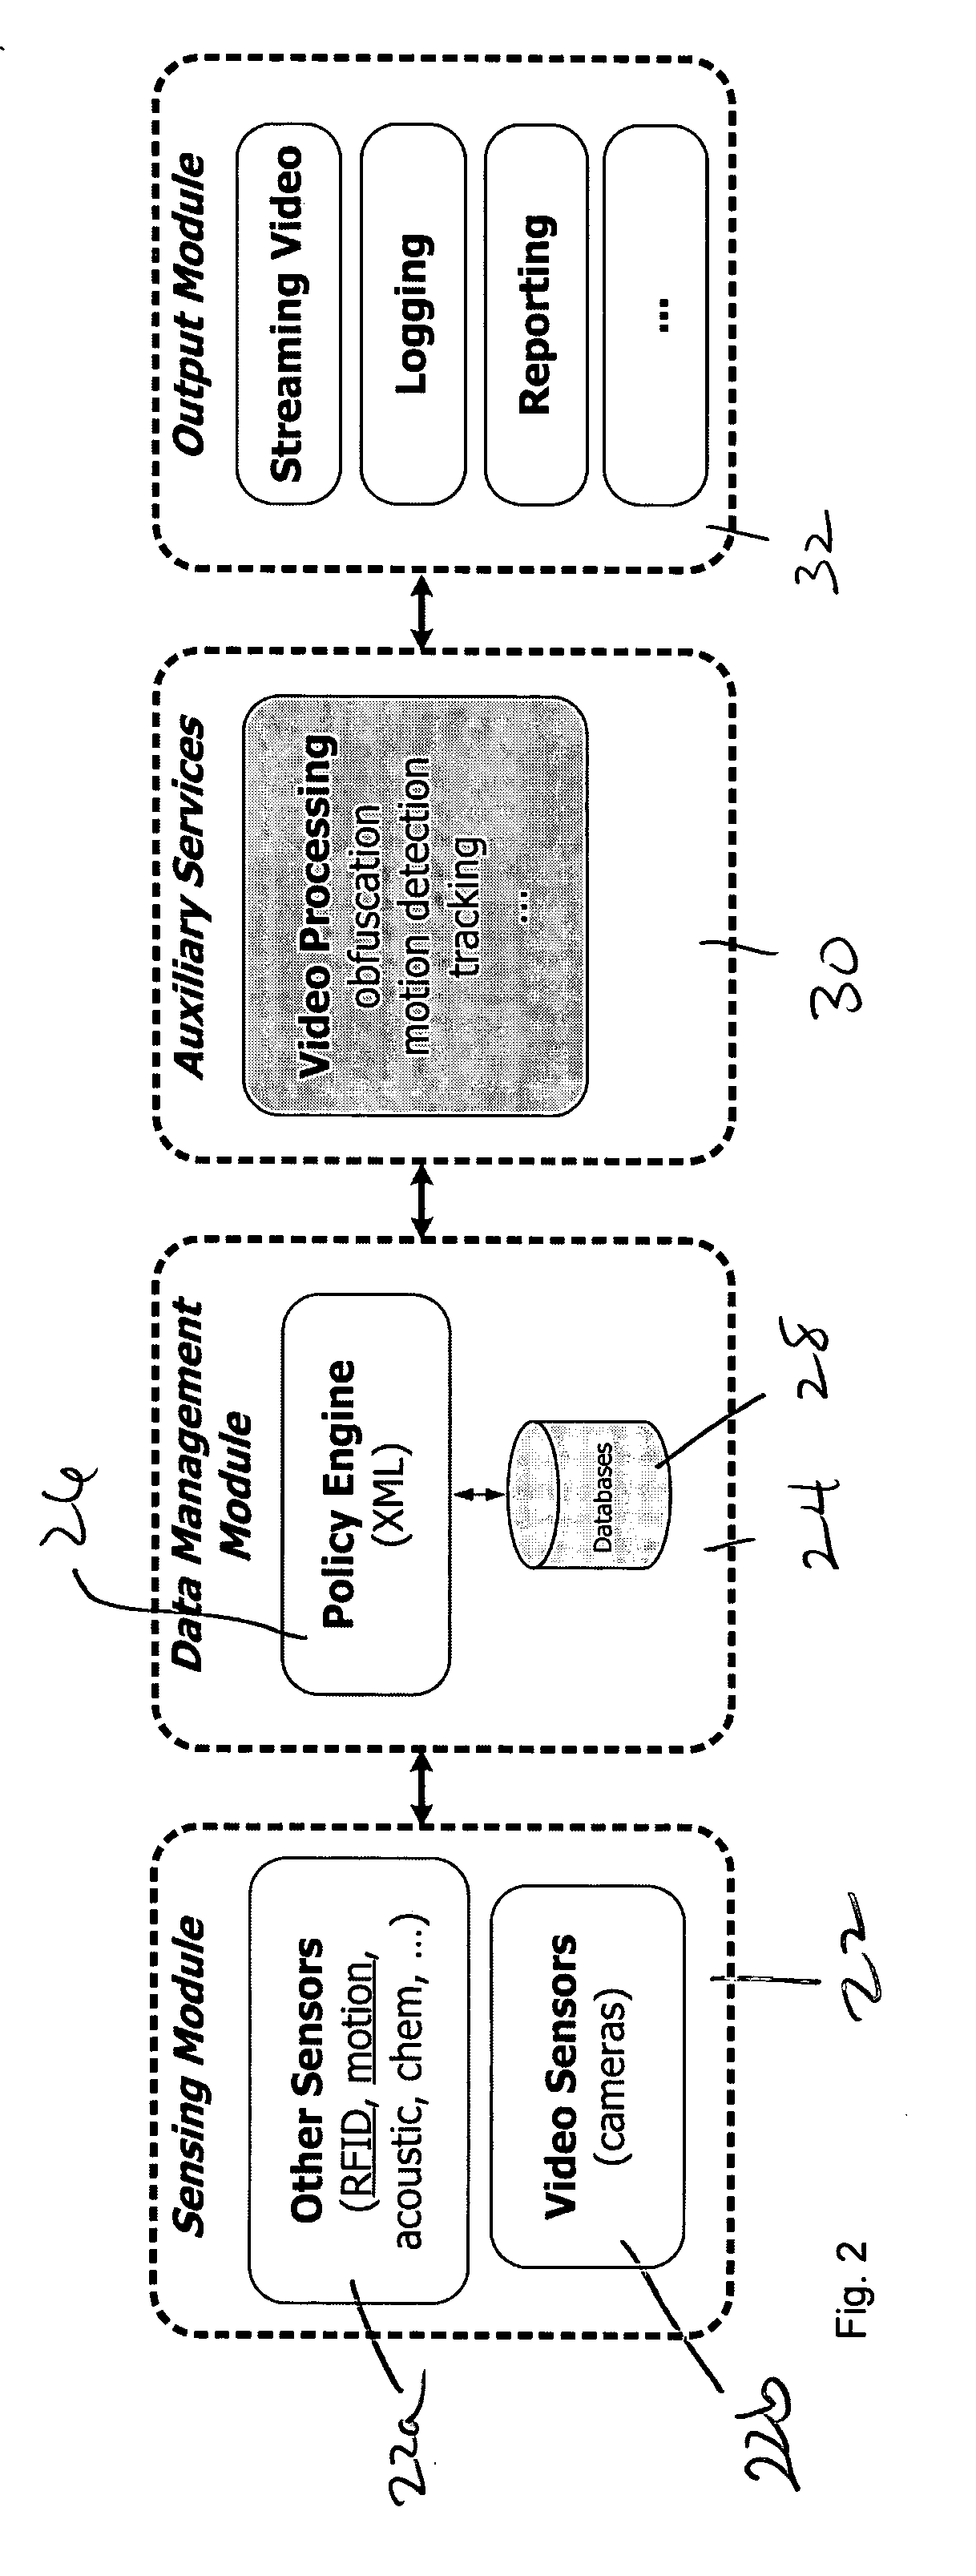 Apparatus and method for privacy protection of data collection in pervasive environments